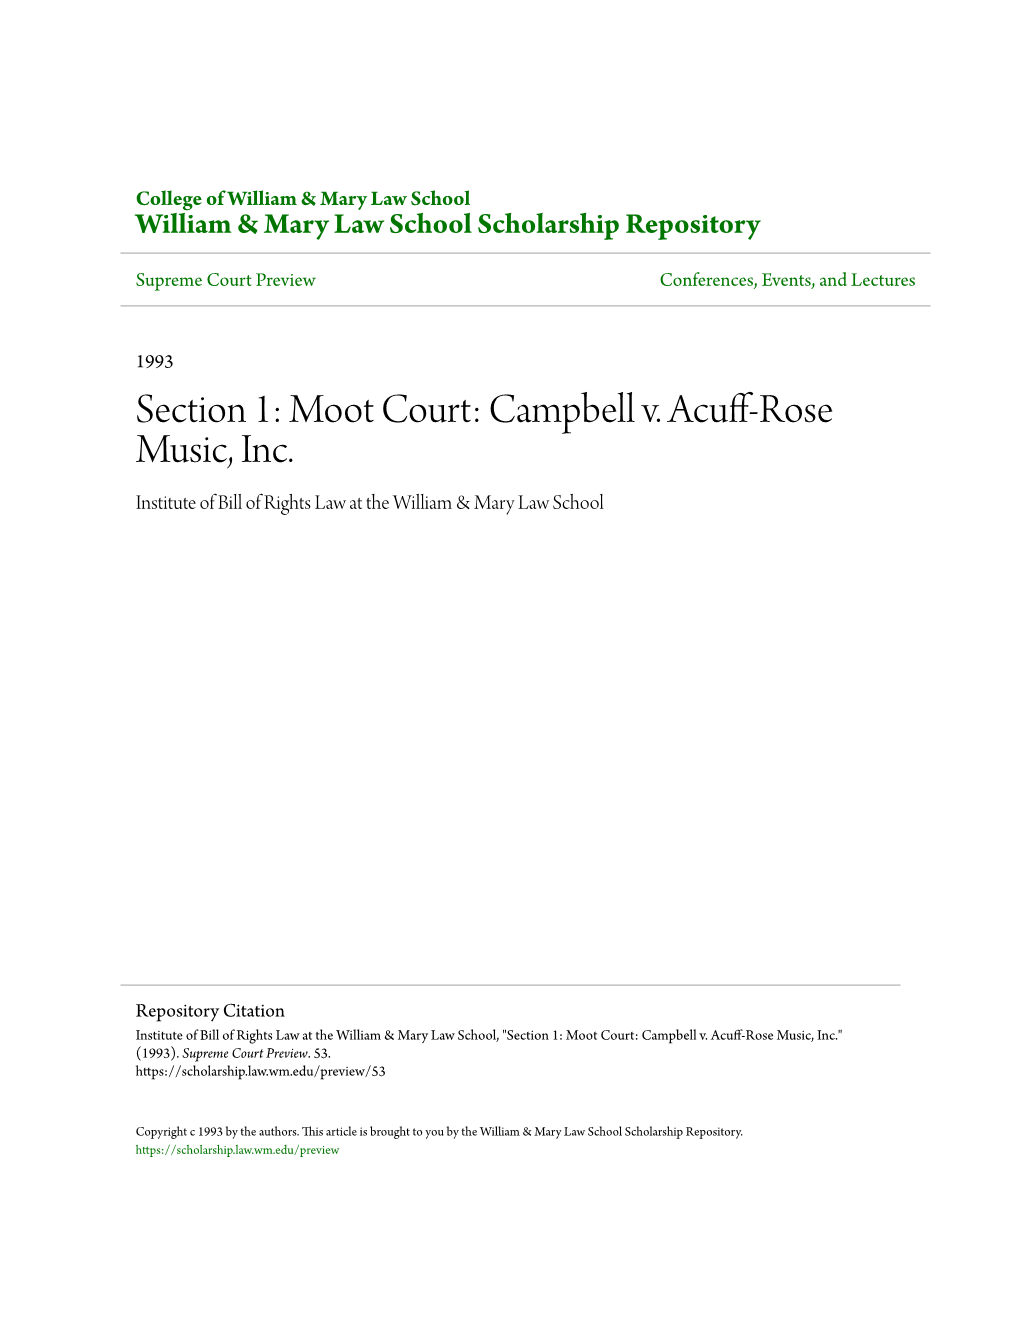 Moot Court: Campbell V. Acuff-Rose Music, Inc. Institute of Bill of Rights Law at the William & Mary Law School